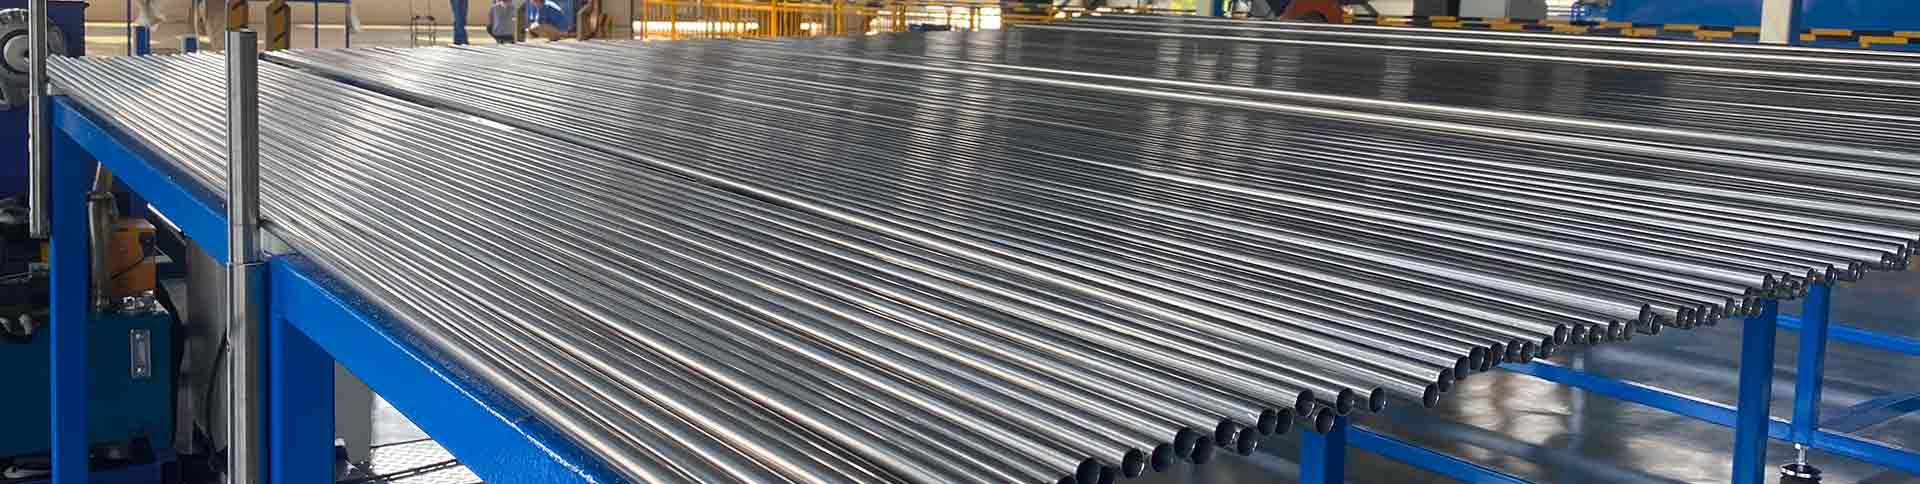 What Is the Performance of Titanium Alloy Pipes and What Are Their Uses?